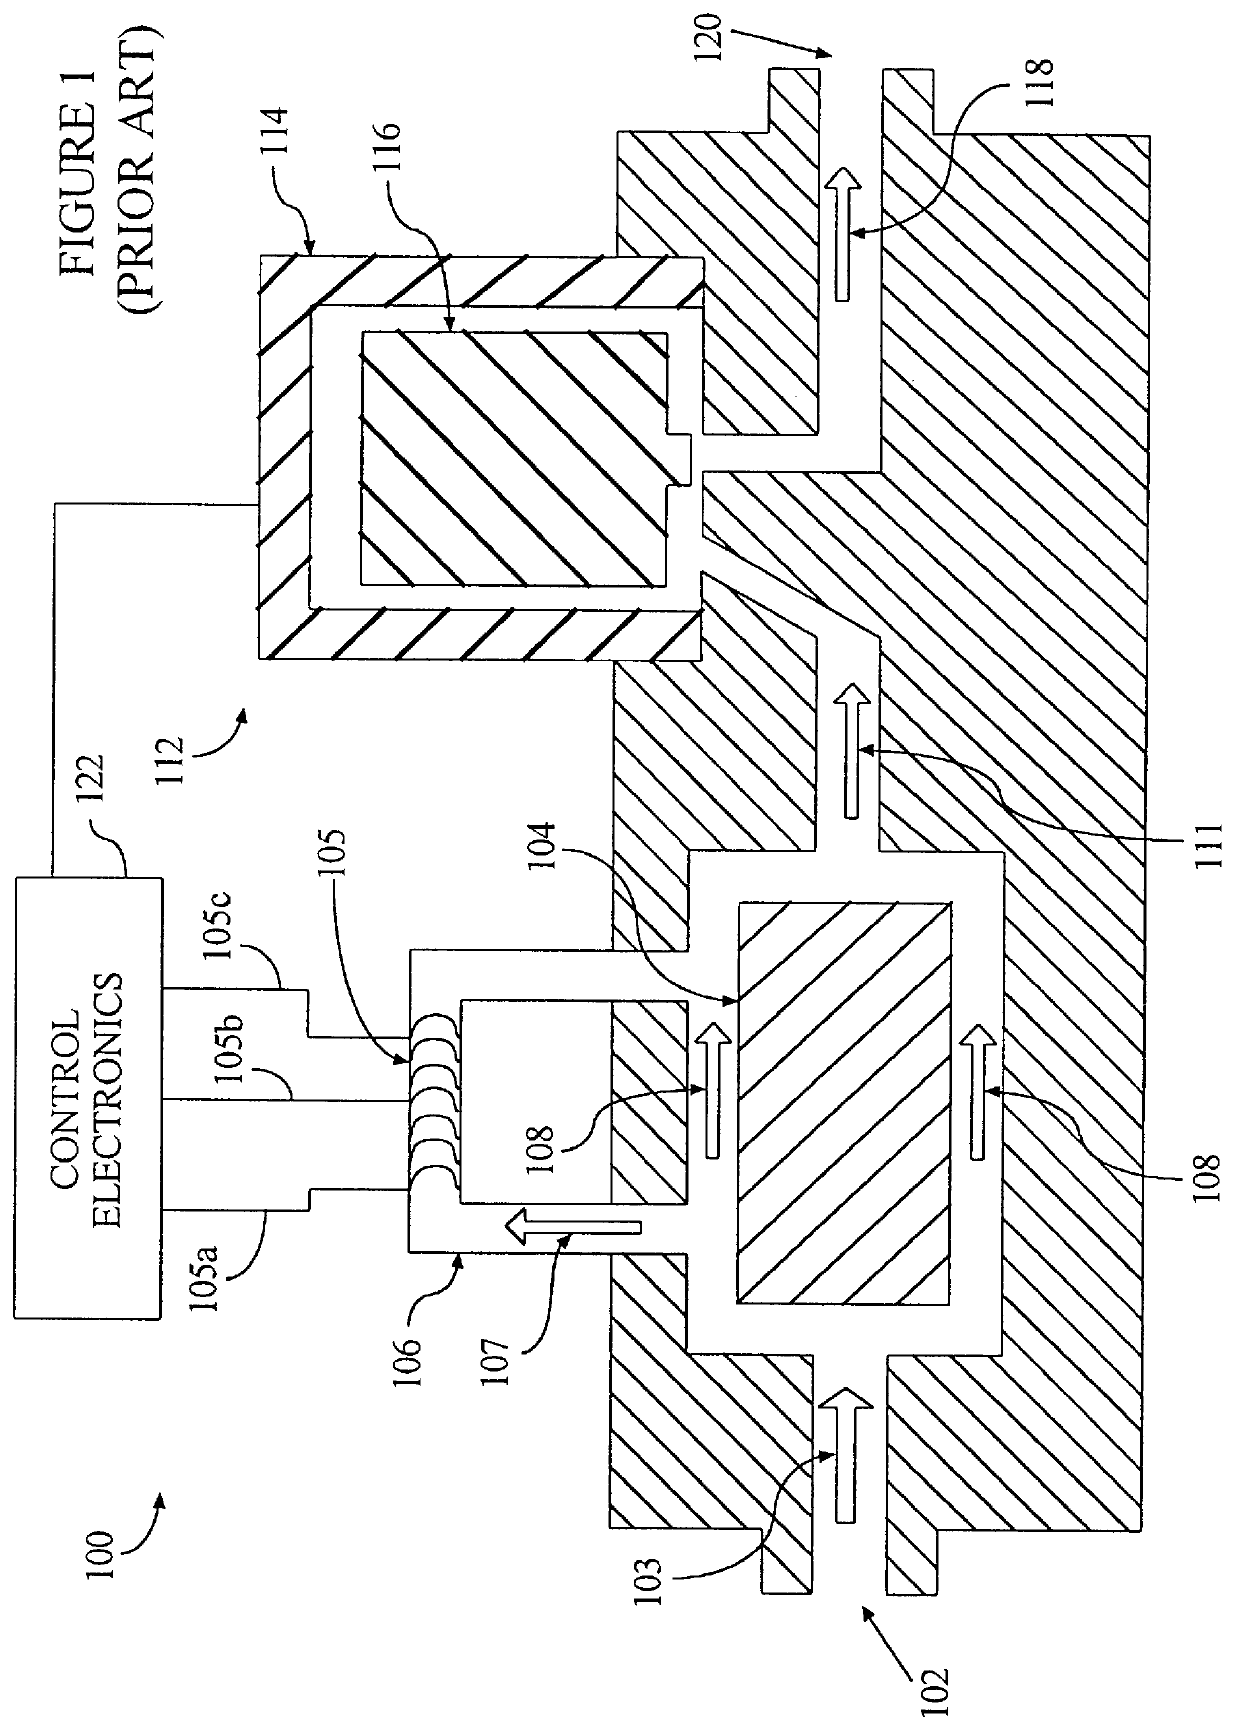 Method for wide range gas flow system with real time flow measurement and correction